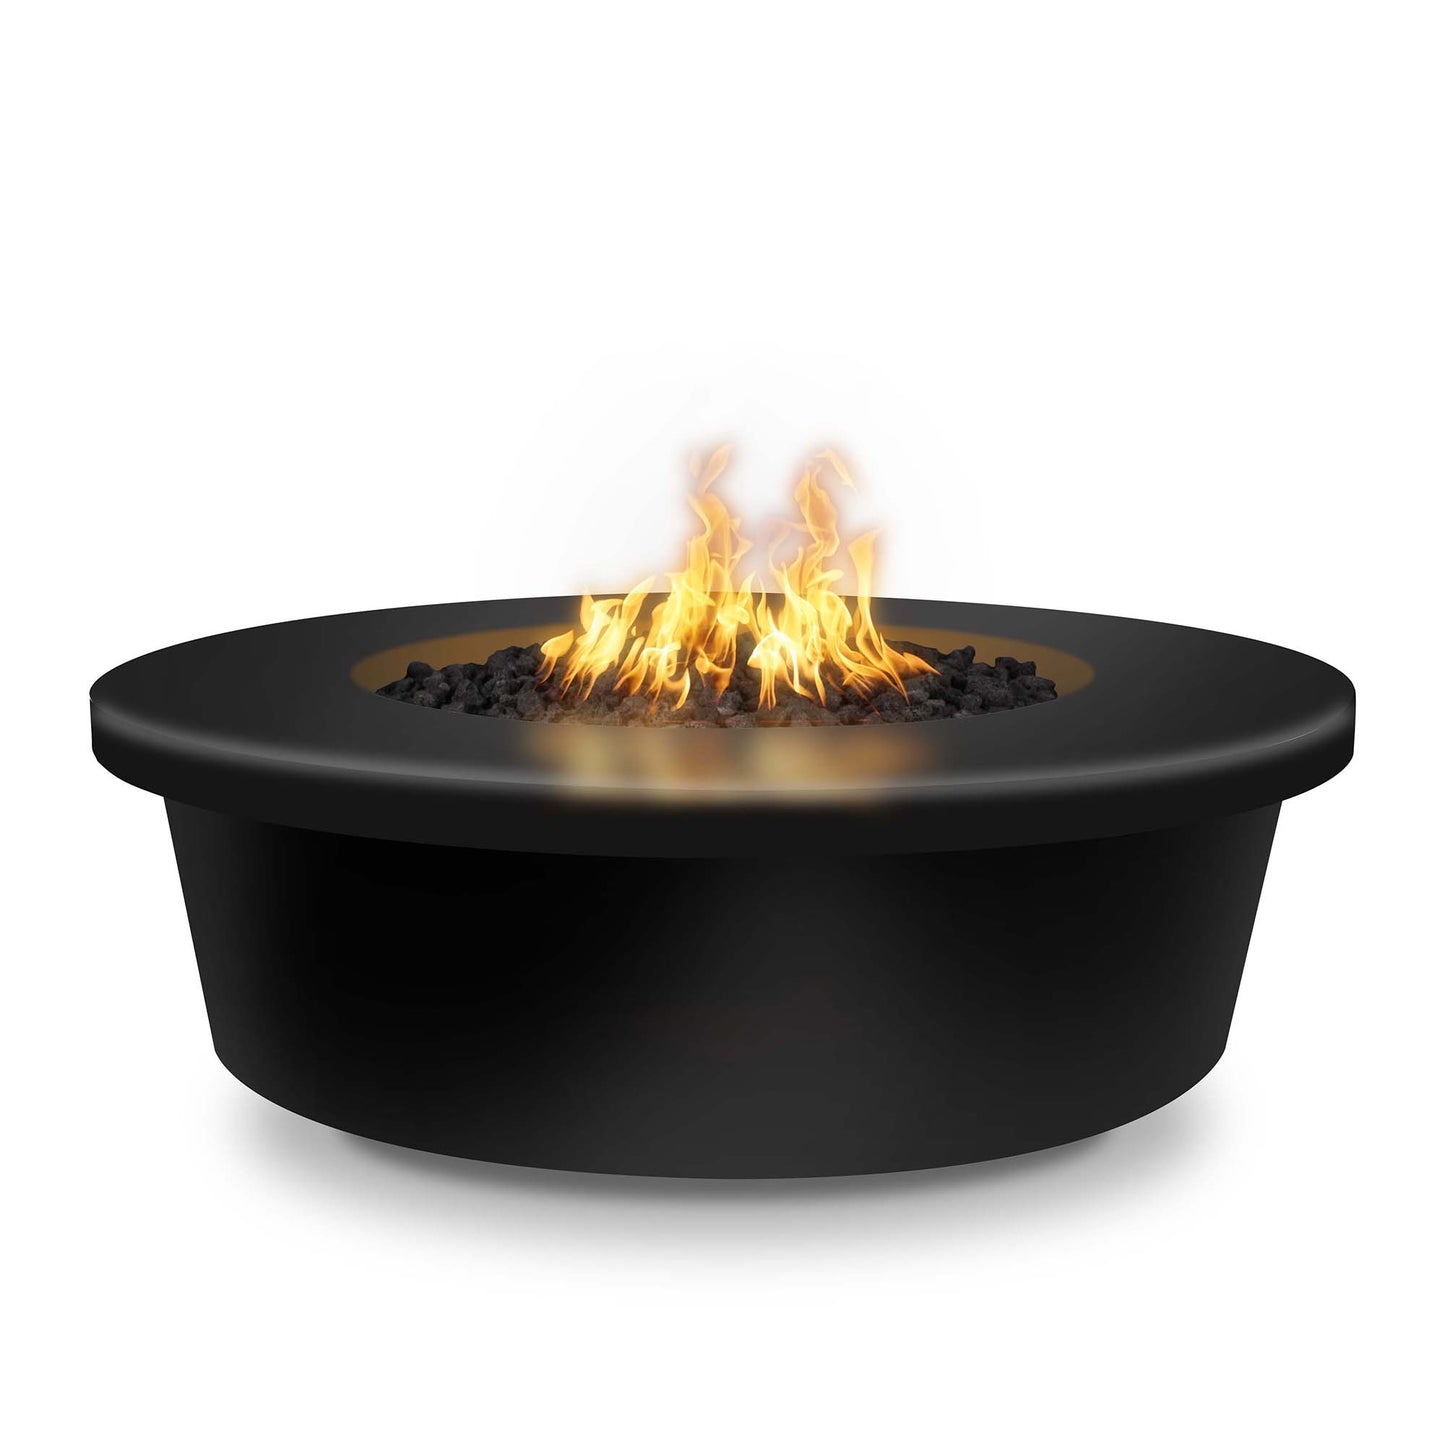 The Outdoor Plus Round Tempe 48" Hammered Copper Natural Gas Fire Pit with 110V Electronic Ignition